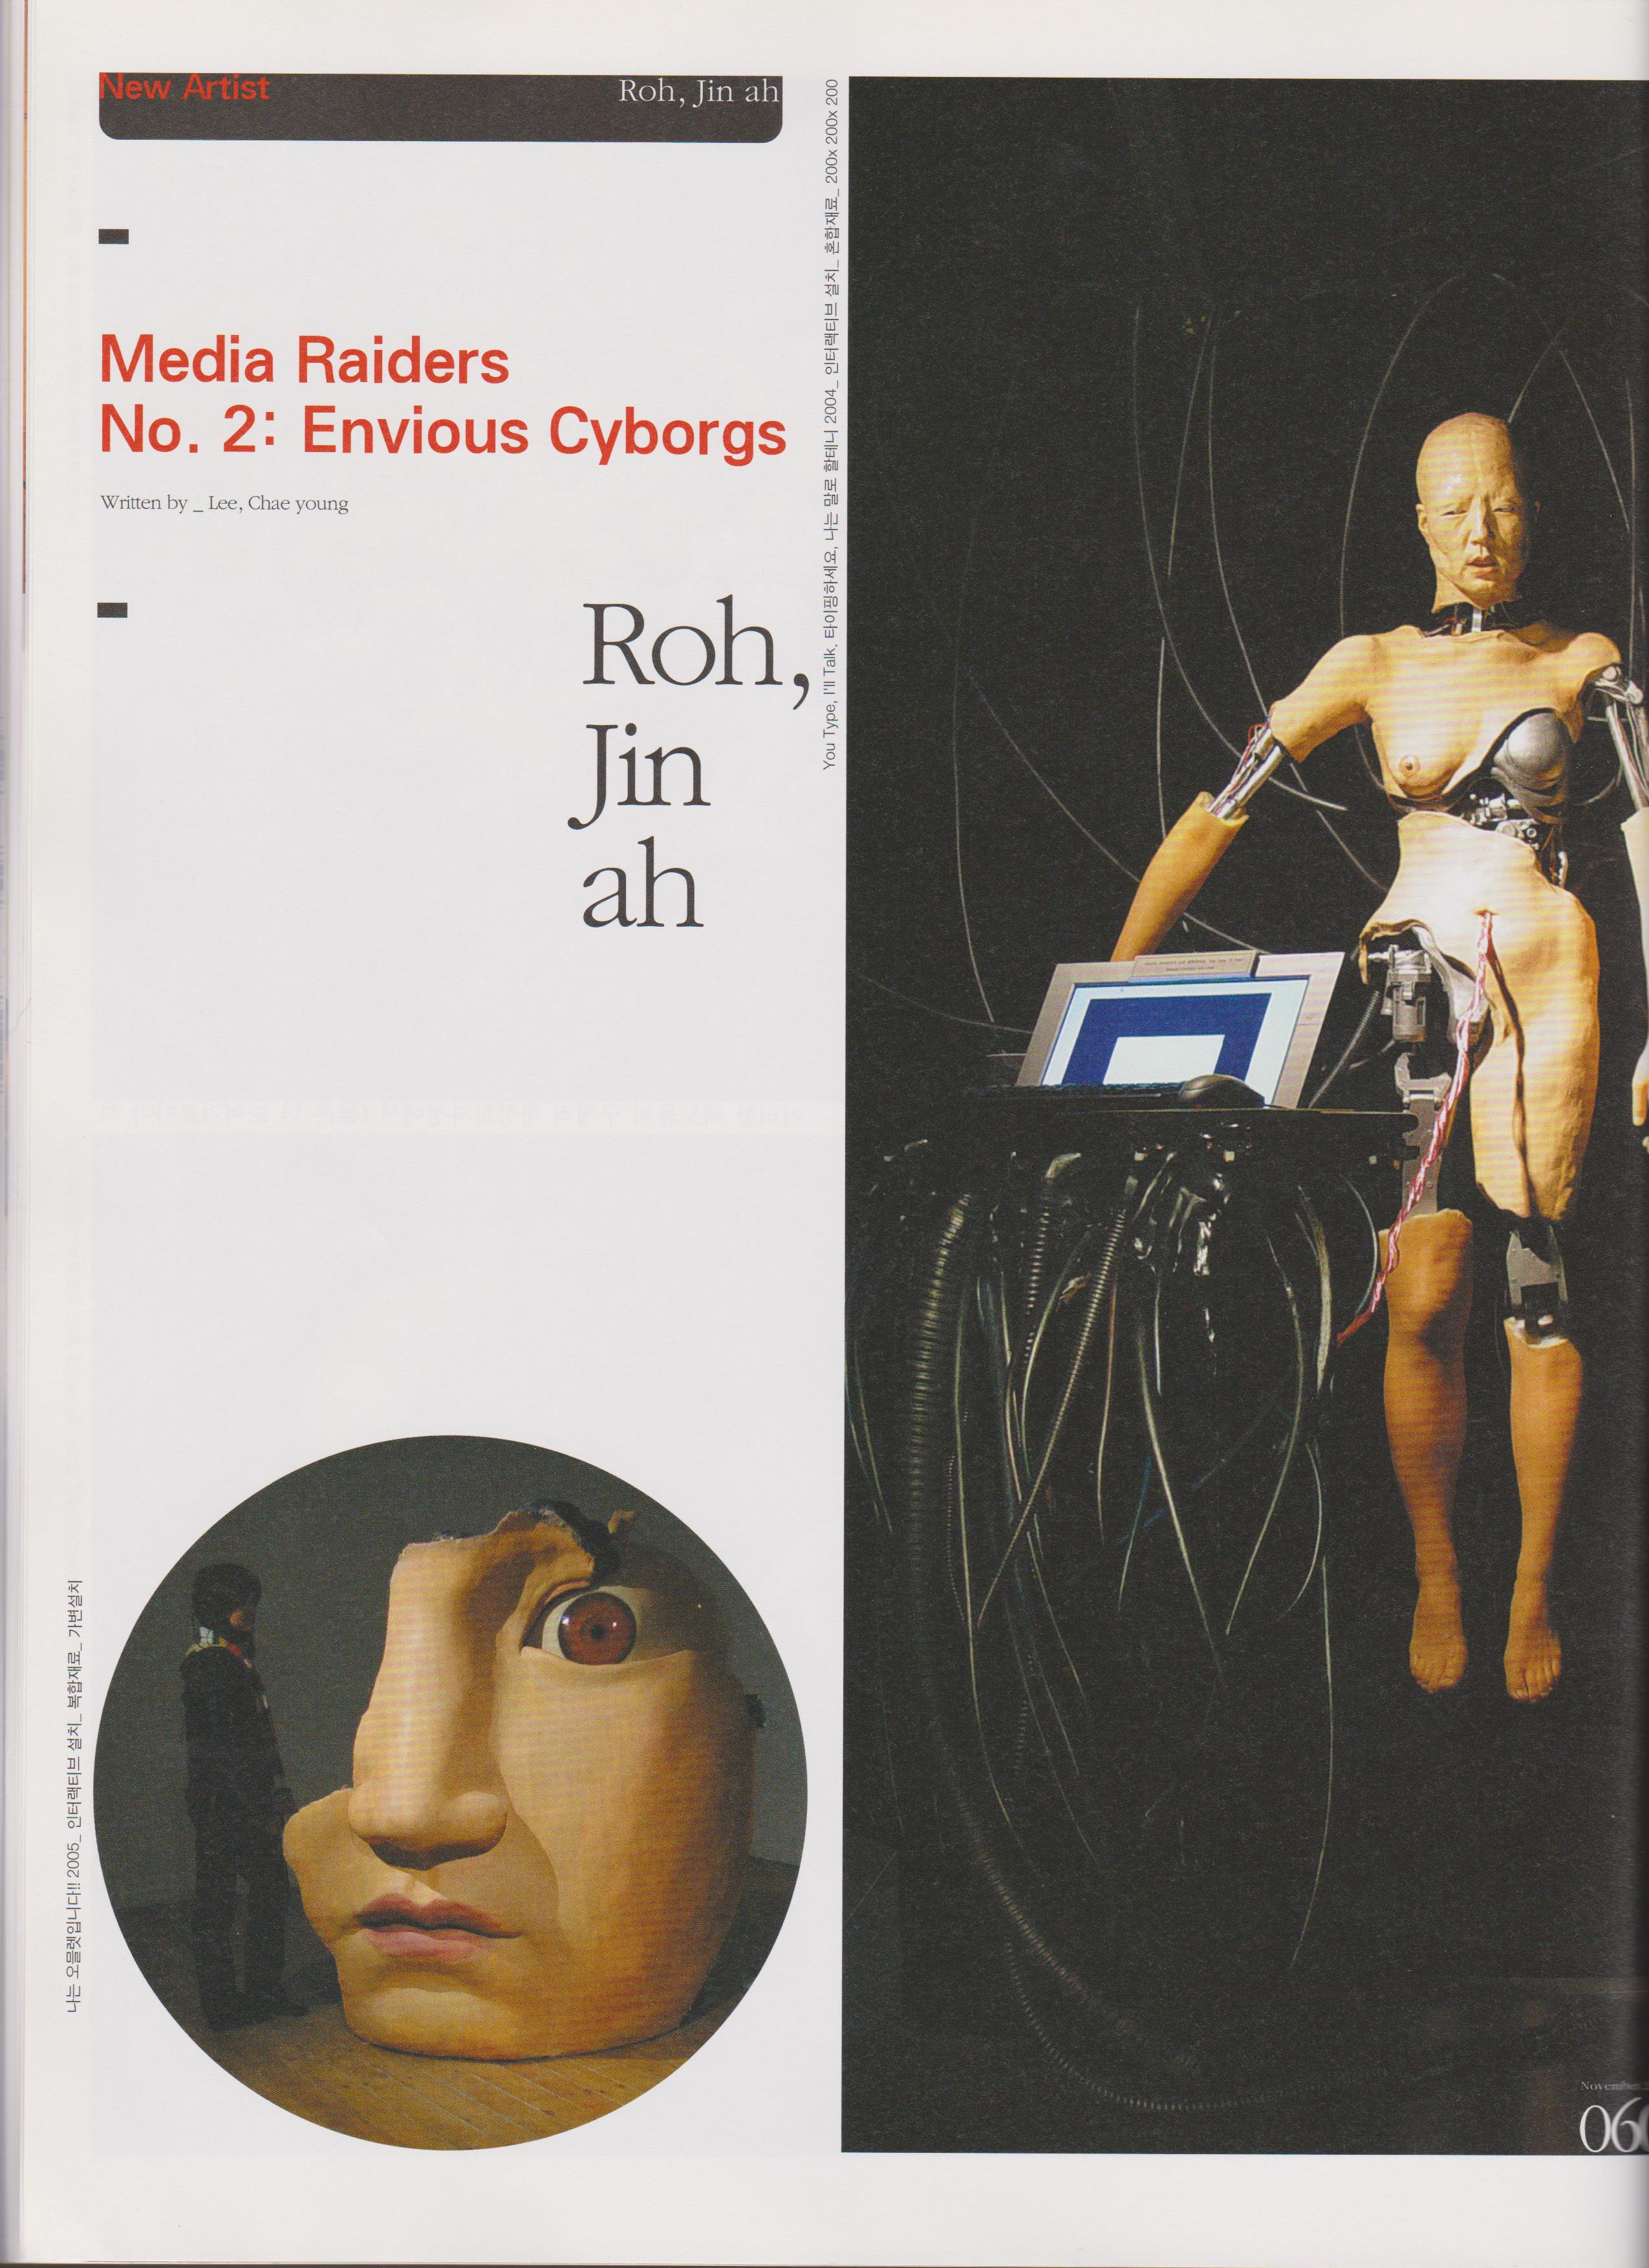 2011.09 Culture Ocean “Media Raiders No.2: Envious Cyborgs” by Lee, Chae young